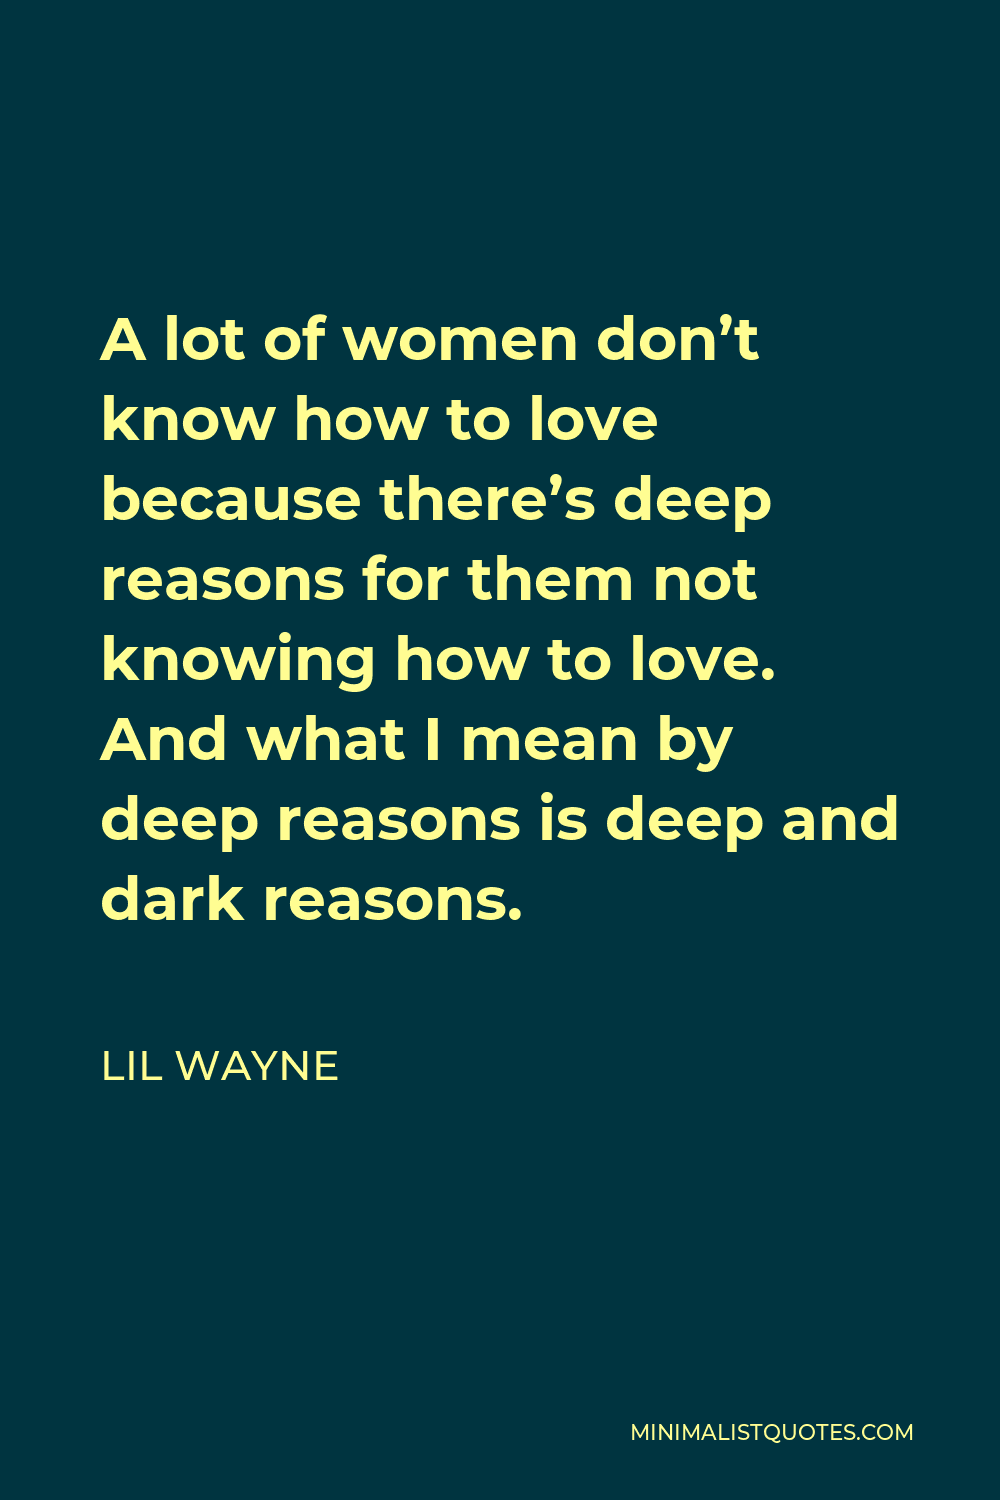 Lil Wayne Quote - A lot of women don’t know how to love because there’s deep reasons for them not knowing how to love. And what I mean by deep reasons is deep and dark reasons.